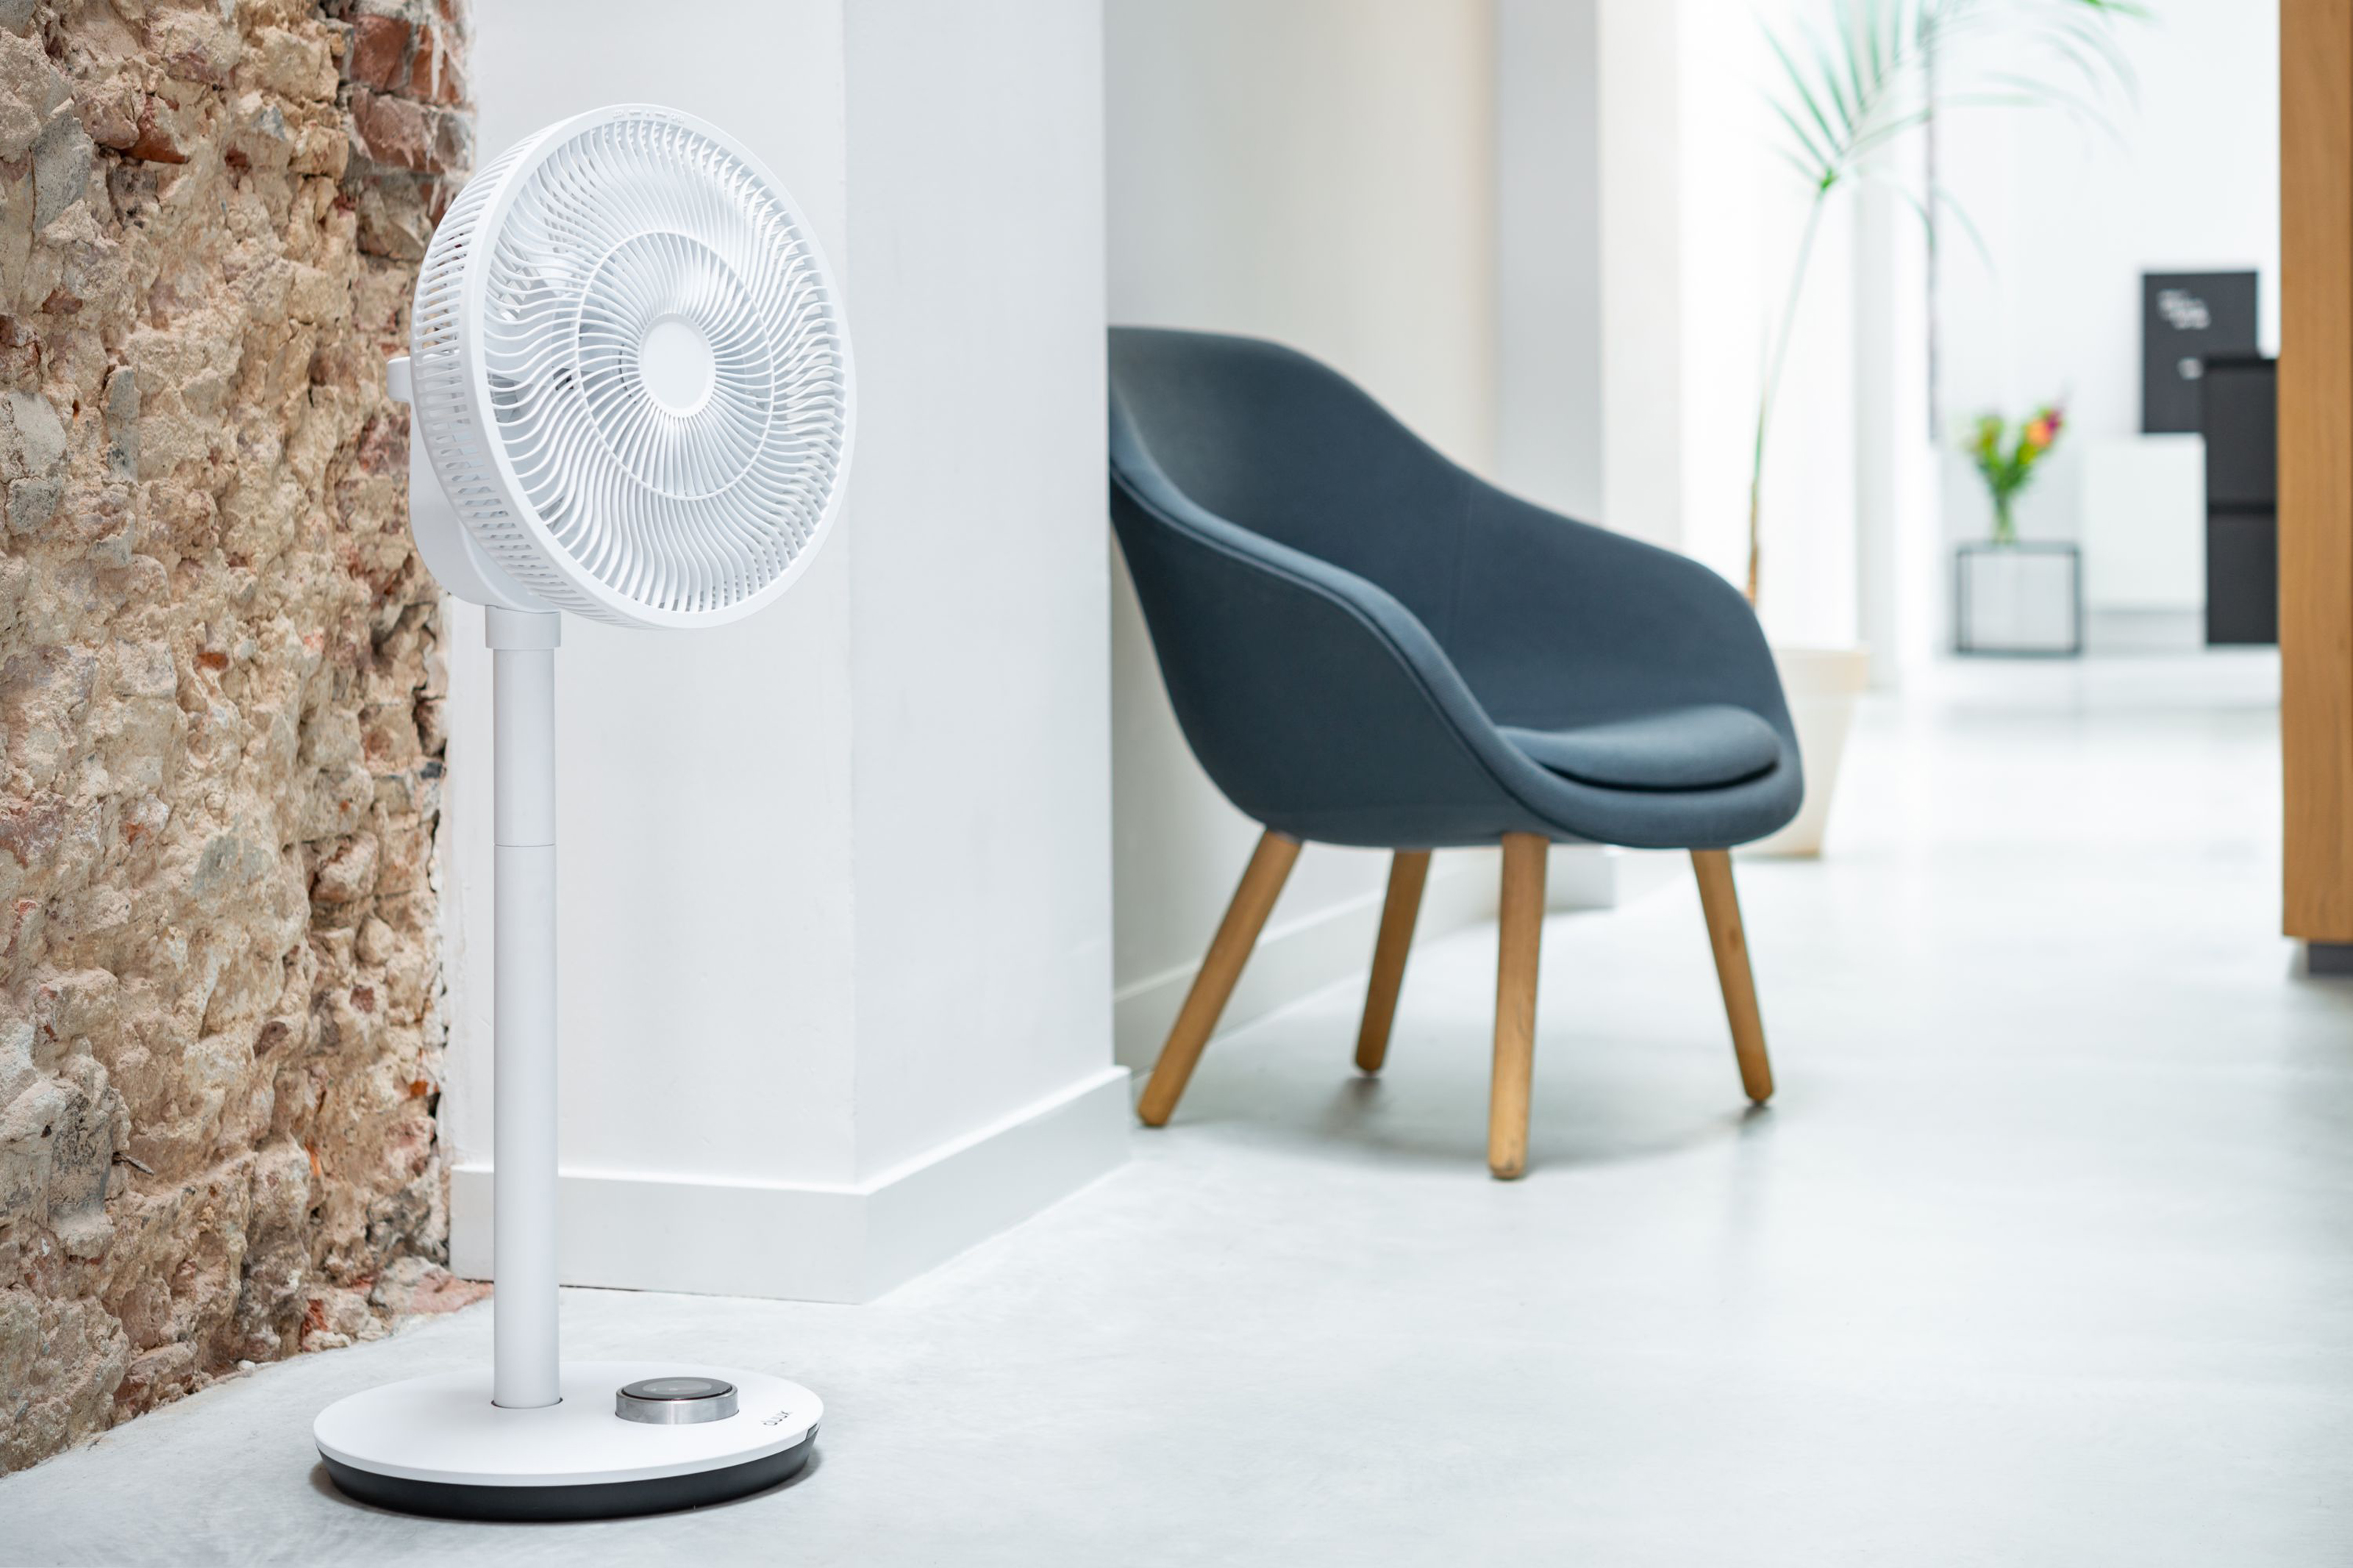 Sway Få favor How to use a fan to cool down a room - expert hacks to try | Livingetc